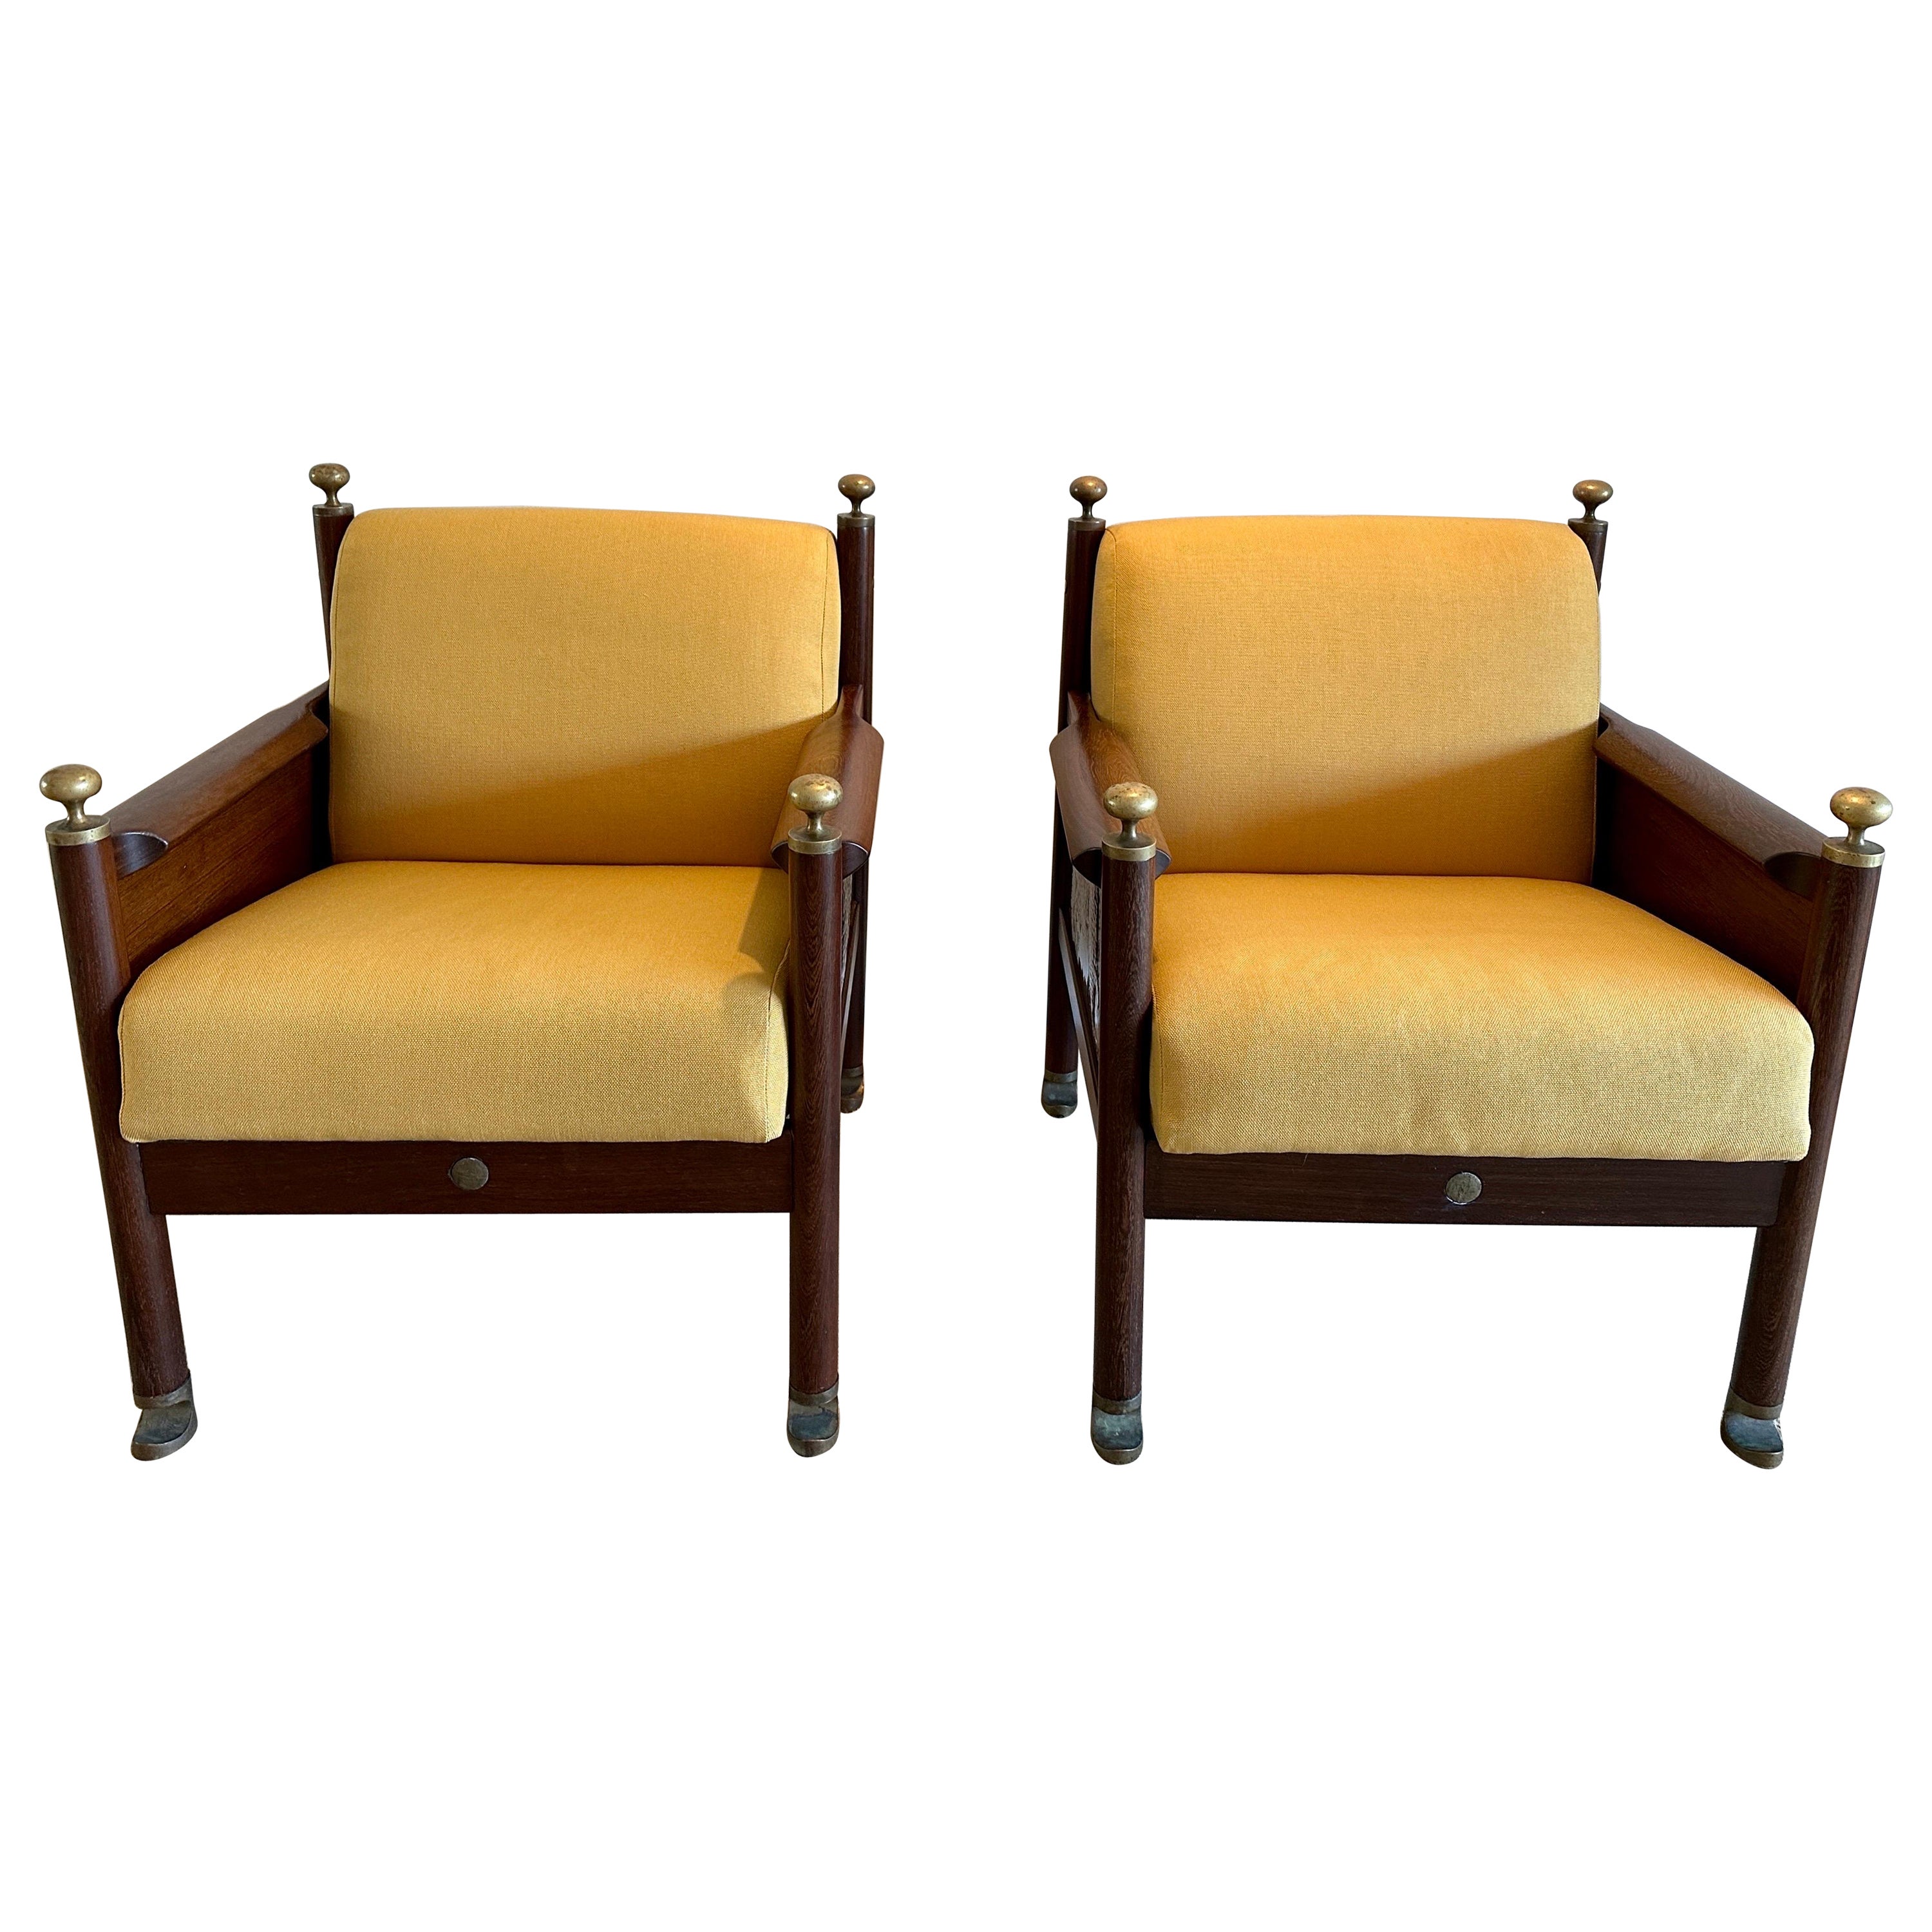 Rare & Important Danish Chairs with Bronze Feet and Hand Rests, Pair For Sale